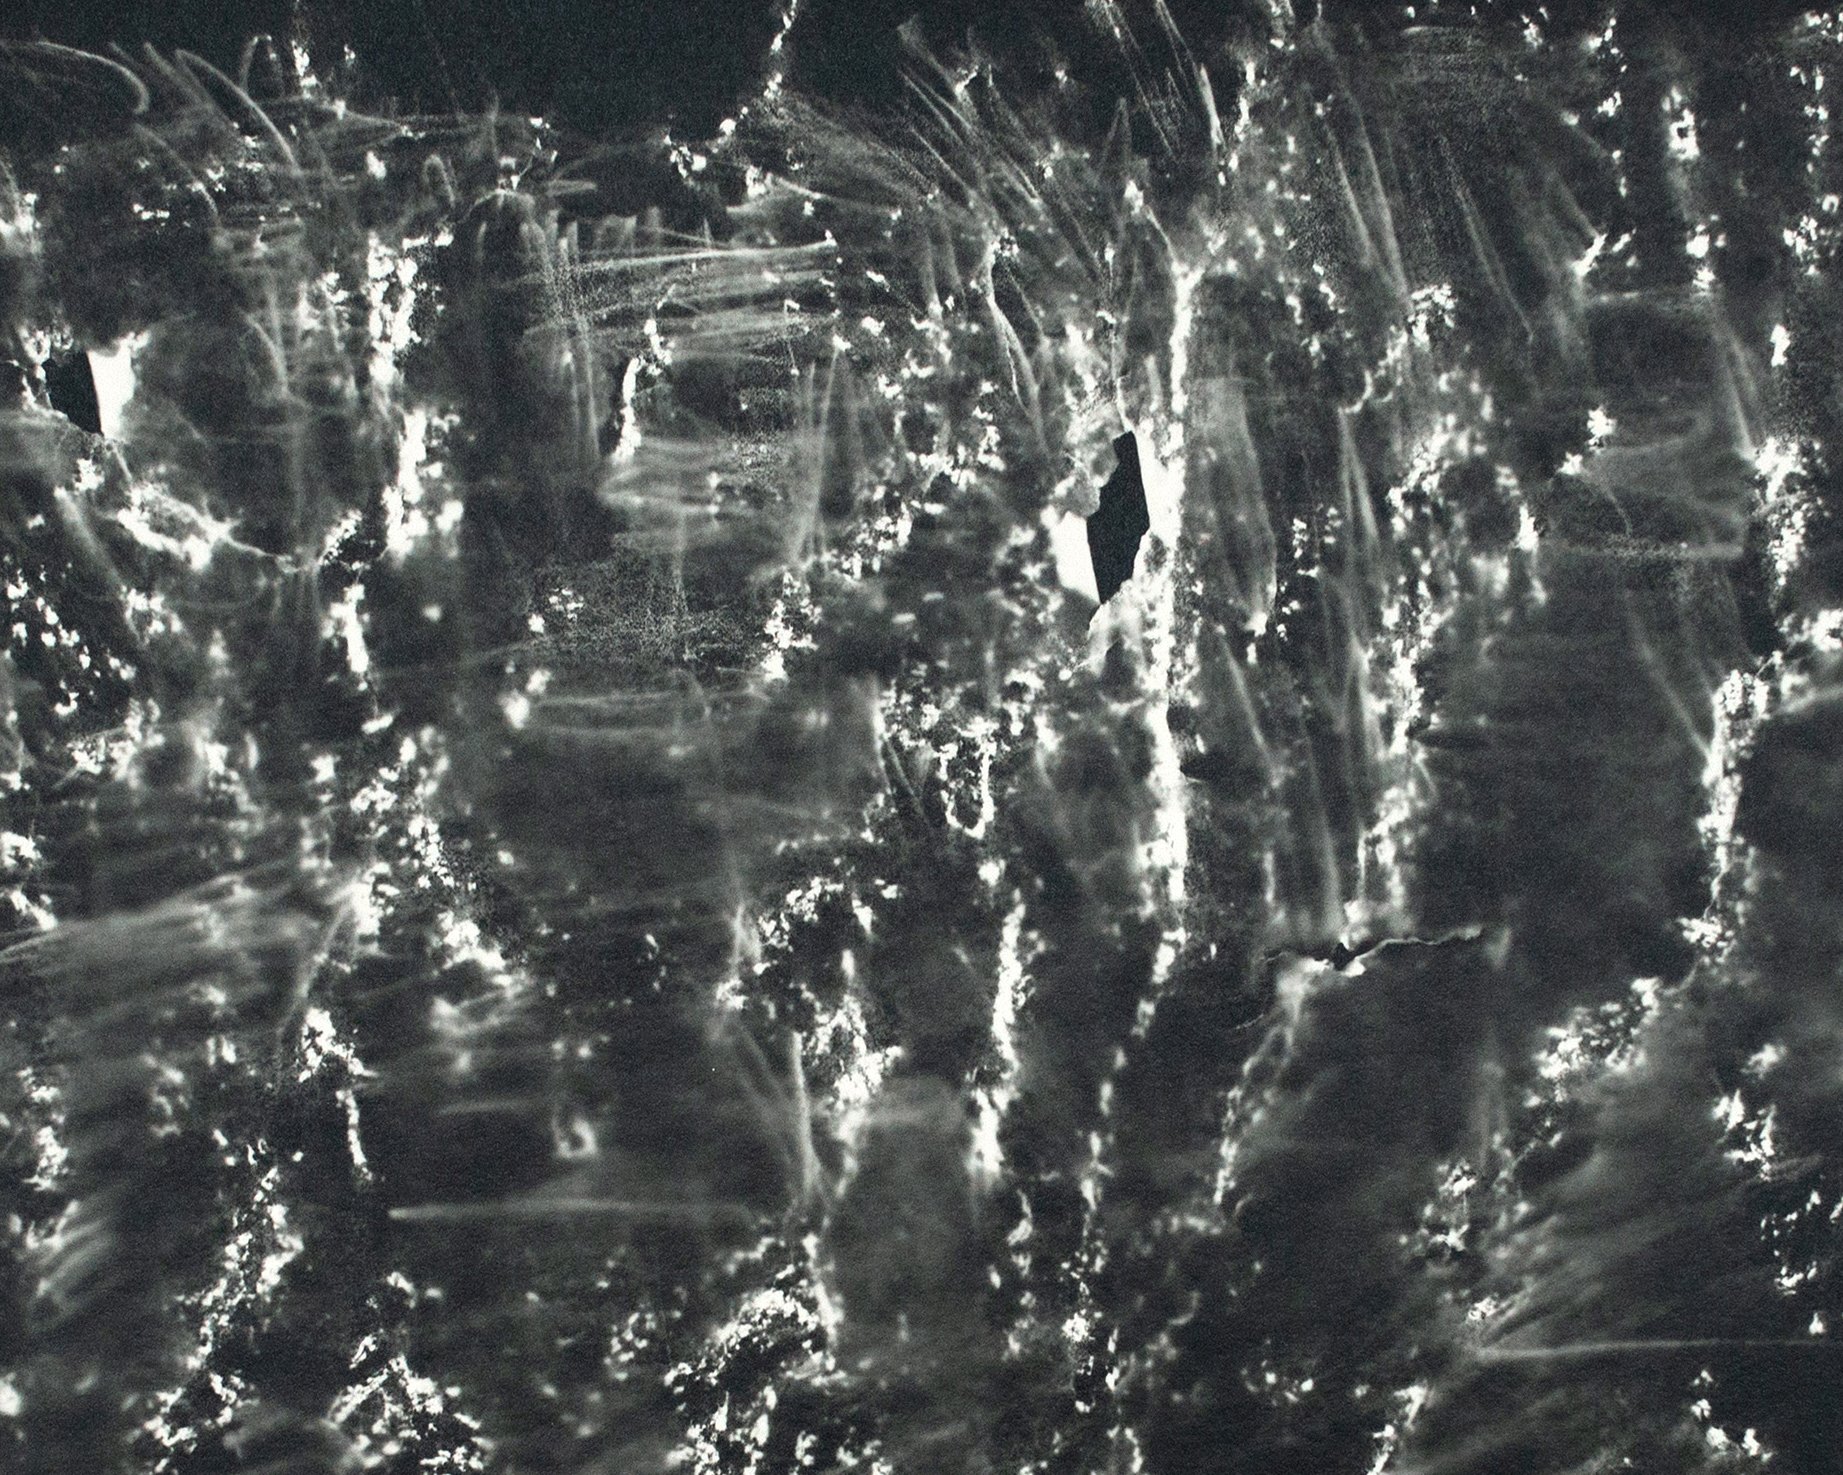 Paper, Rubbing, Tear (The Ghost Tree Greets me) [detail]